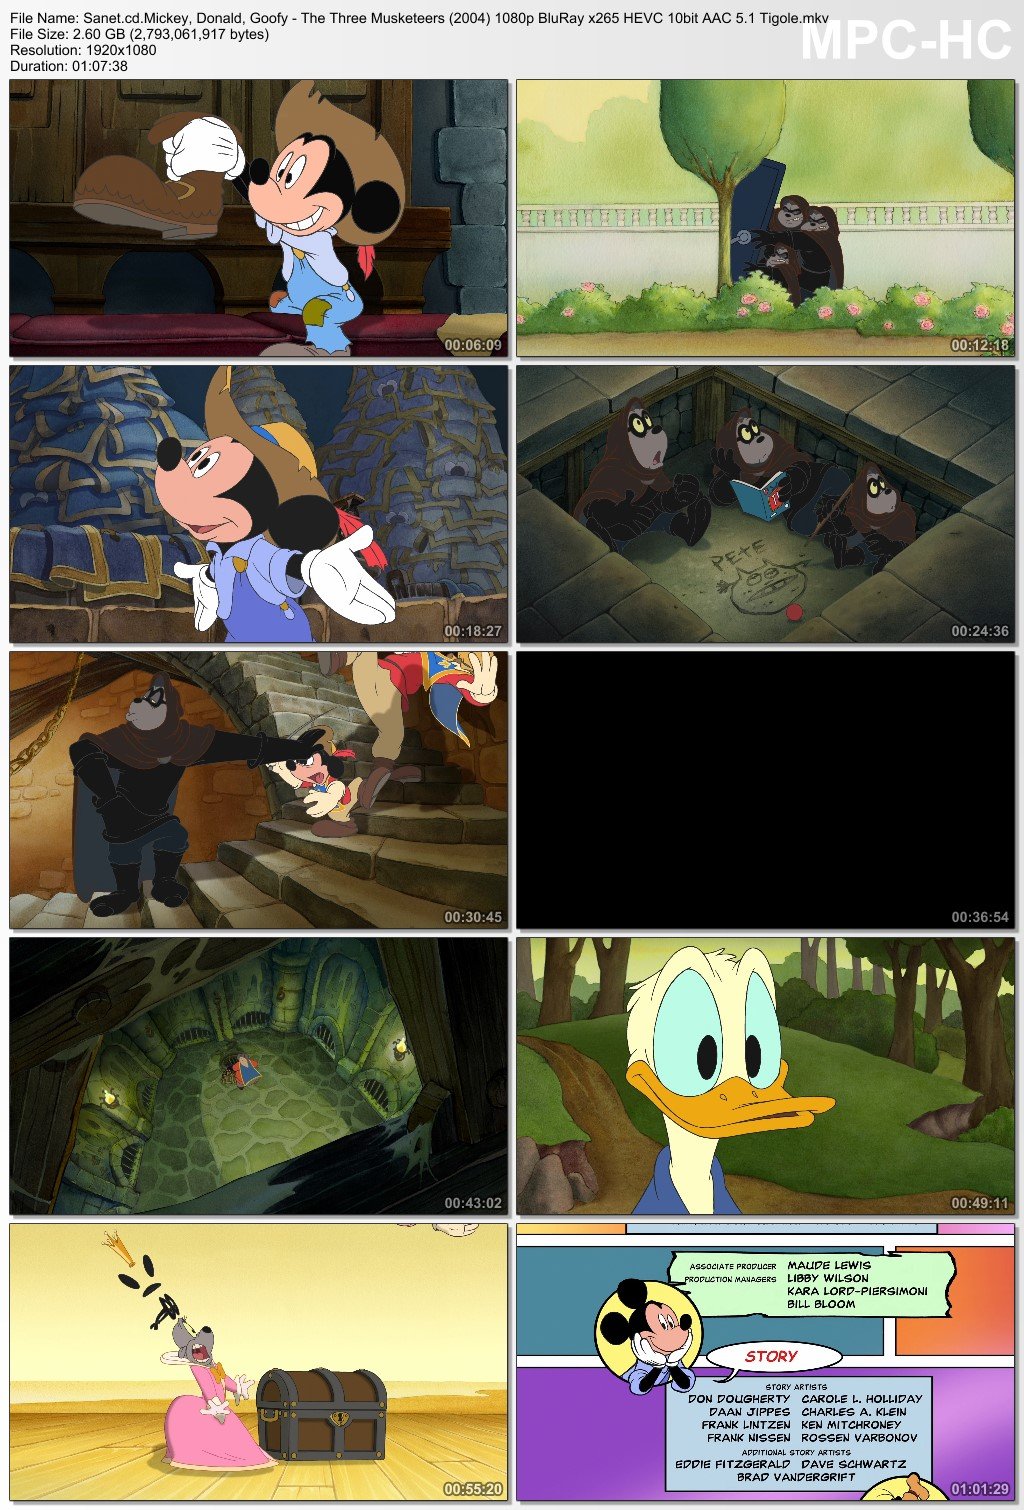 Download Mickey Donald Goofy The Three Musketeers 2004 1080p BluRay ...